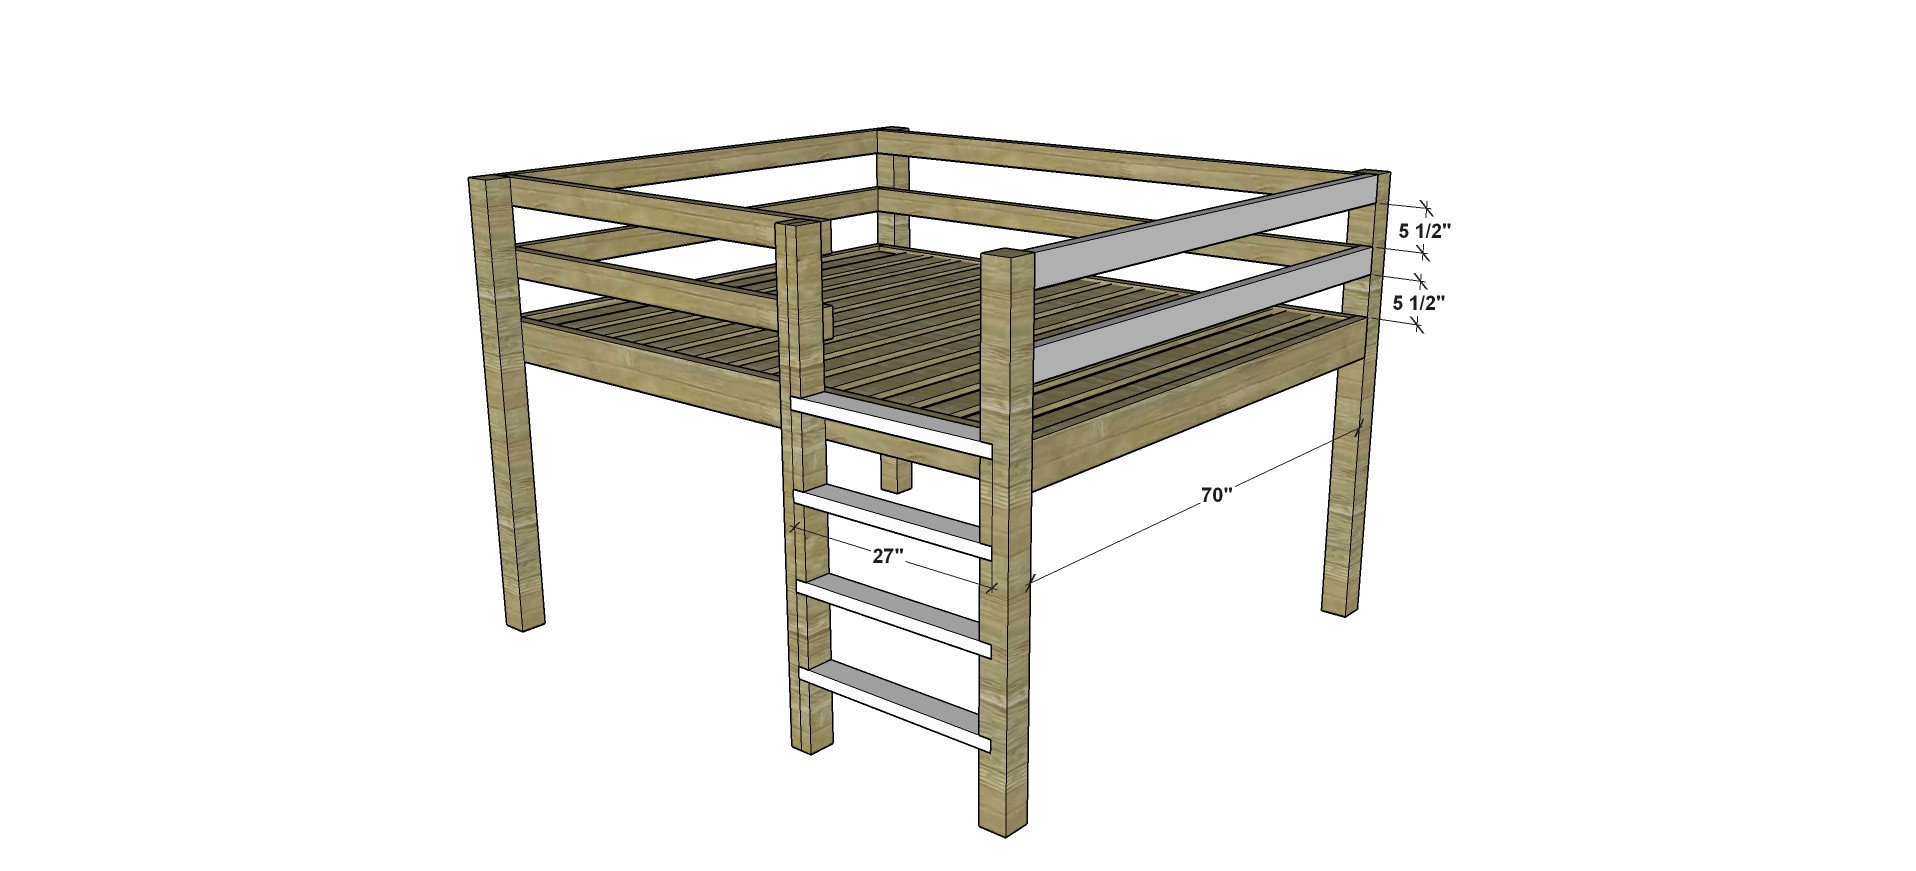 Loft Bed Plans DIY
 Free DIY Furniture Plans How to Build a Queen Sized Low